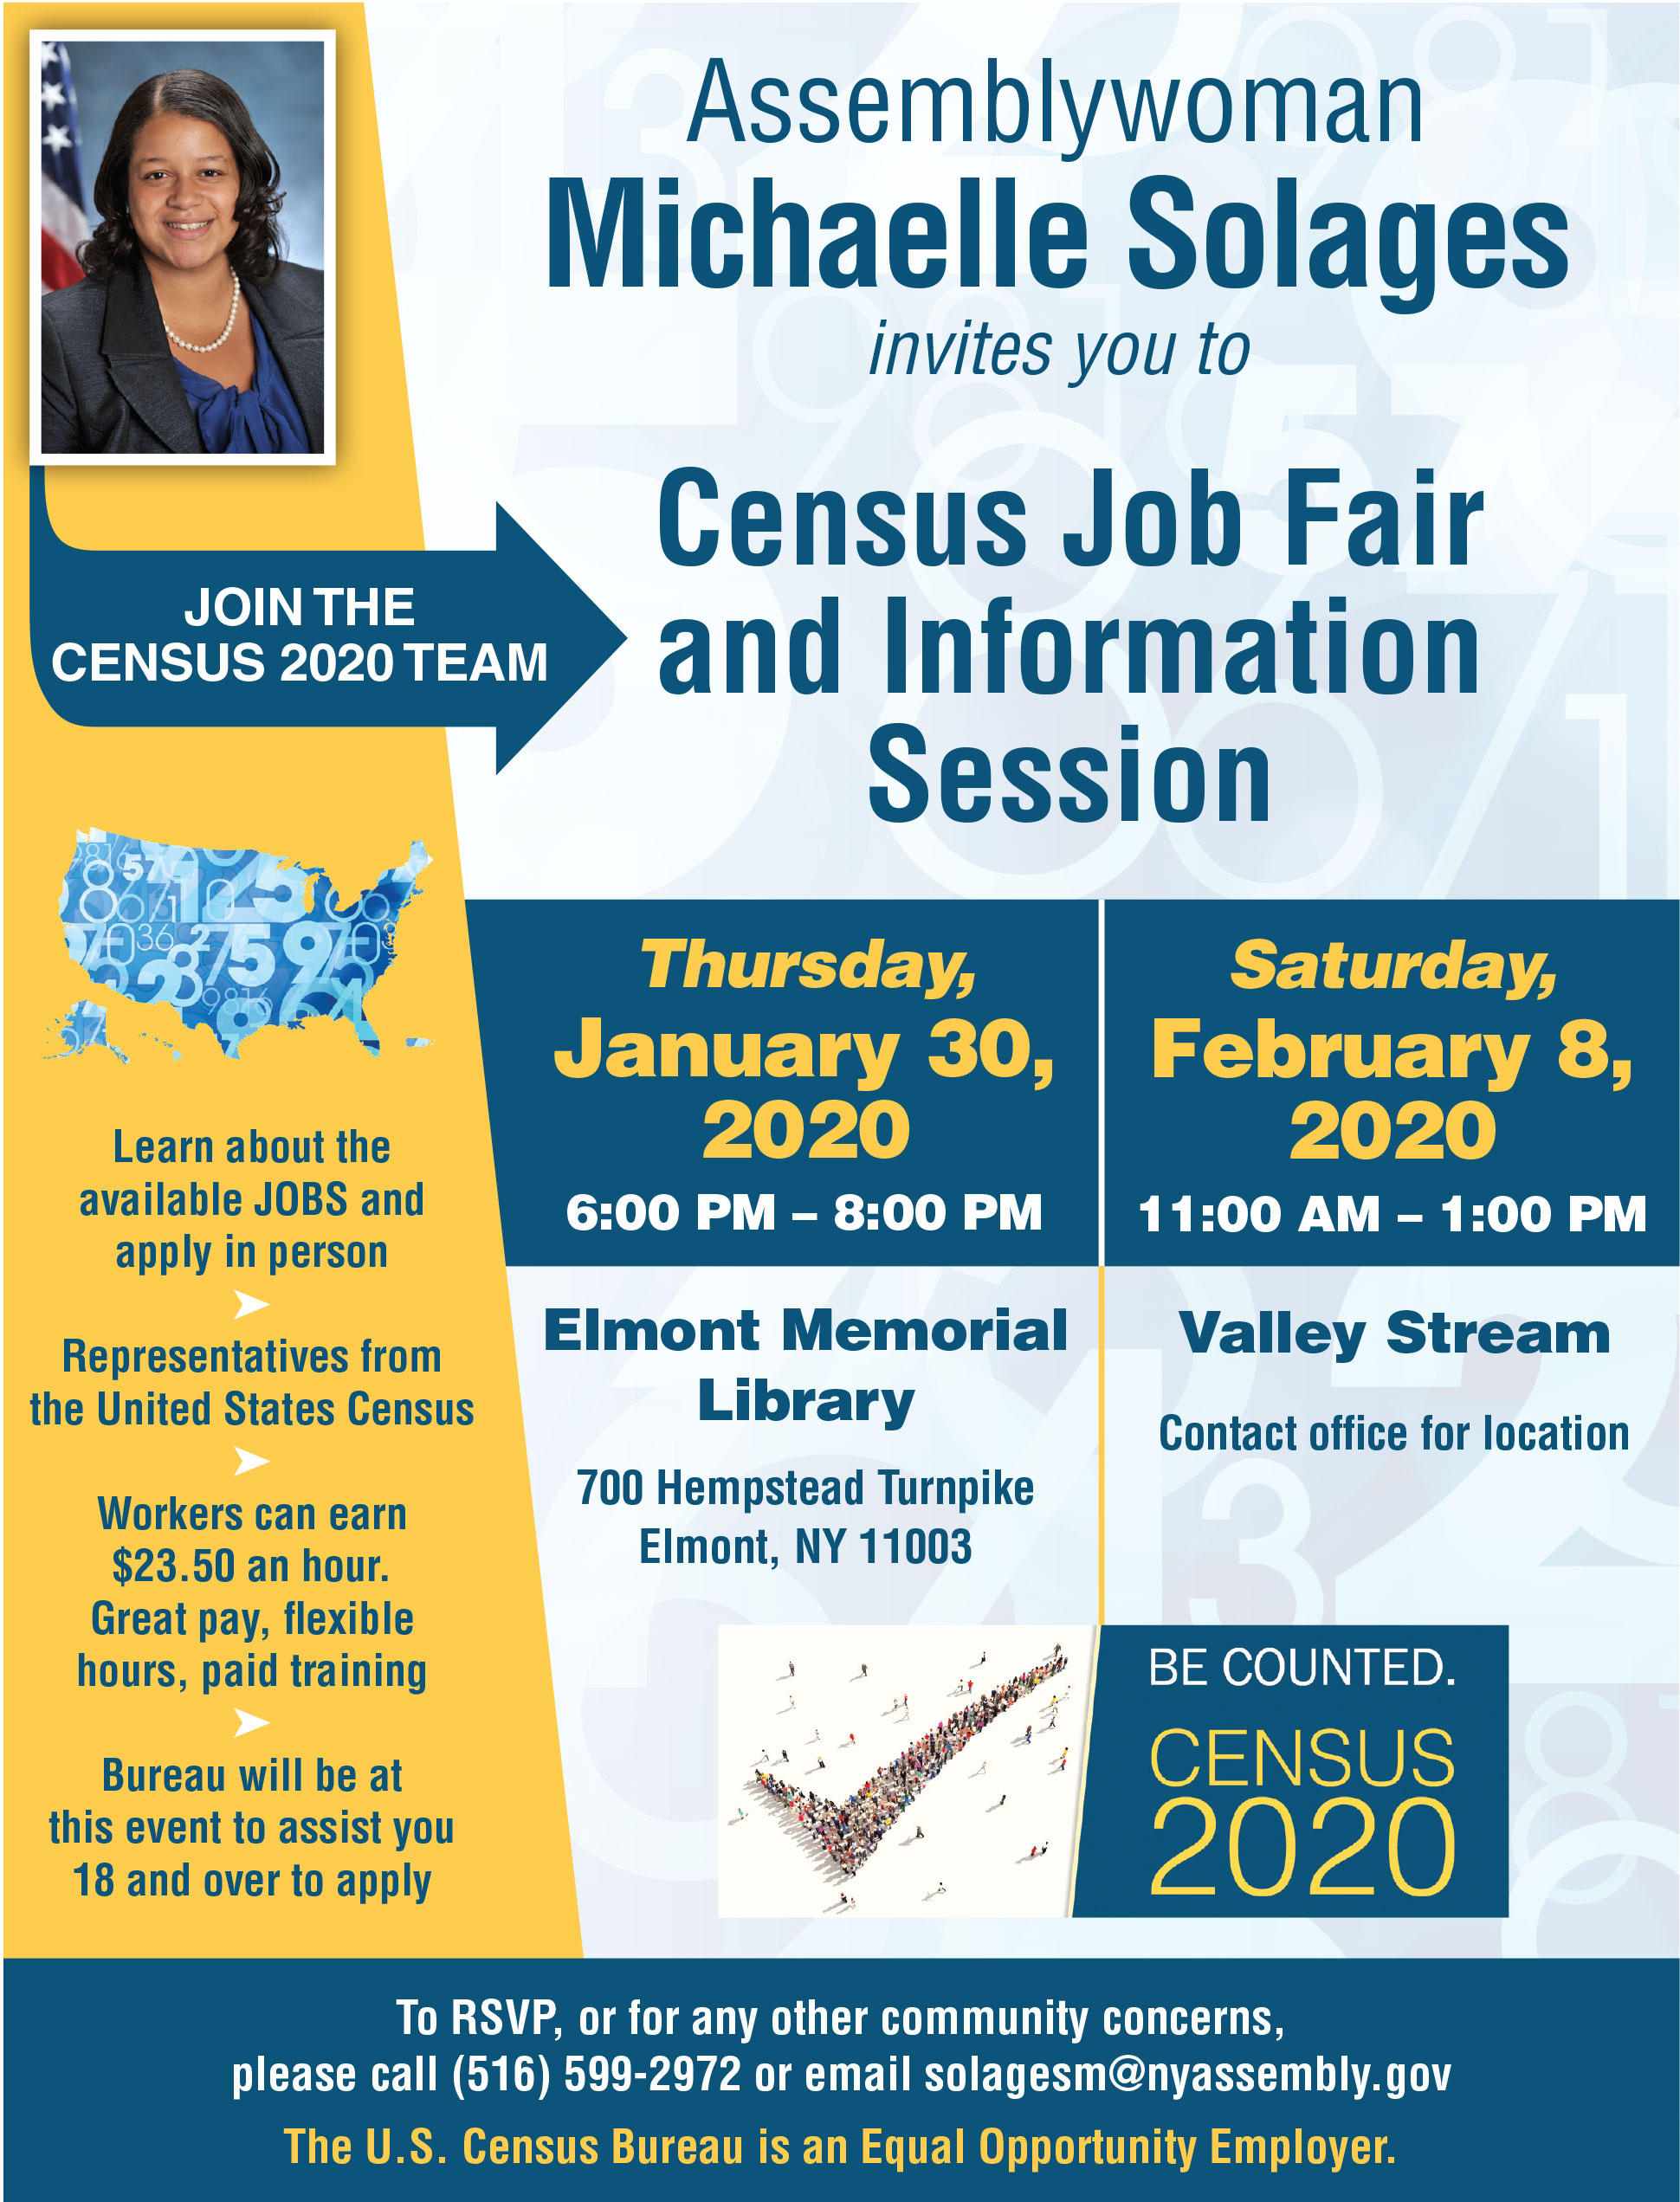 Assemblywoman Michaelle Solages invites you to Census Job Fair and Information Session